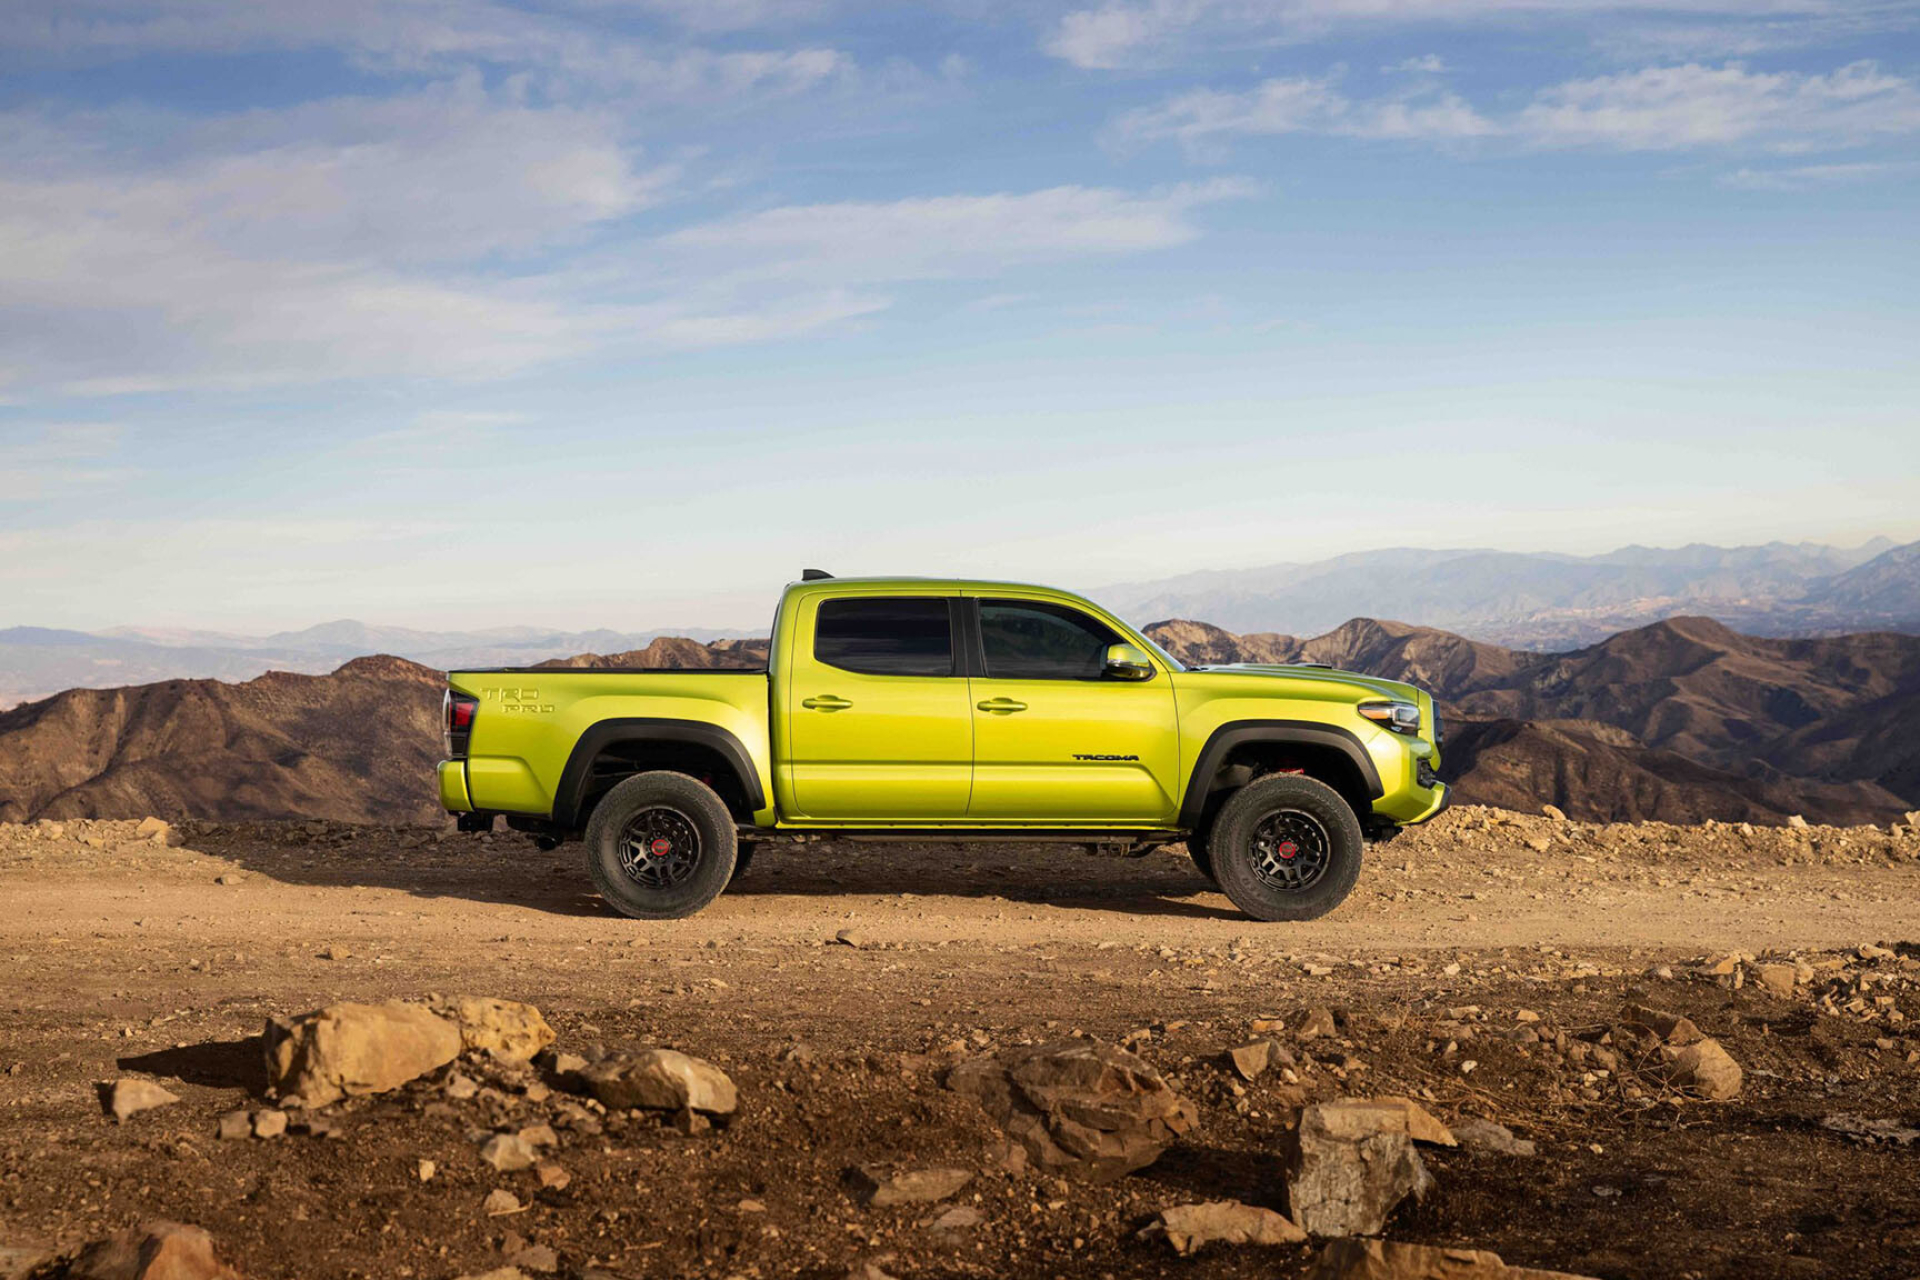 Toyota Tacoma: 2022 TRD Pro Trail Model, Japanese off-road cars. 1920x1280 HD Background.